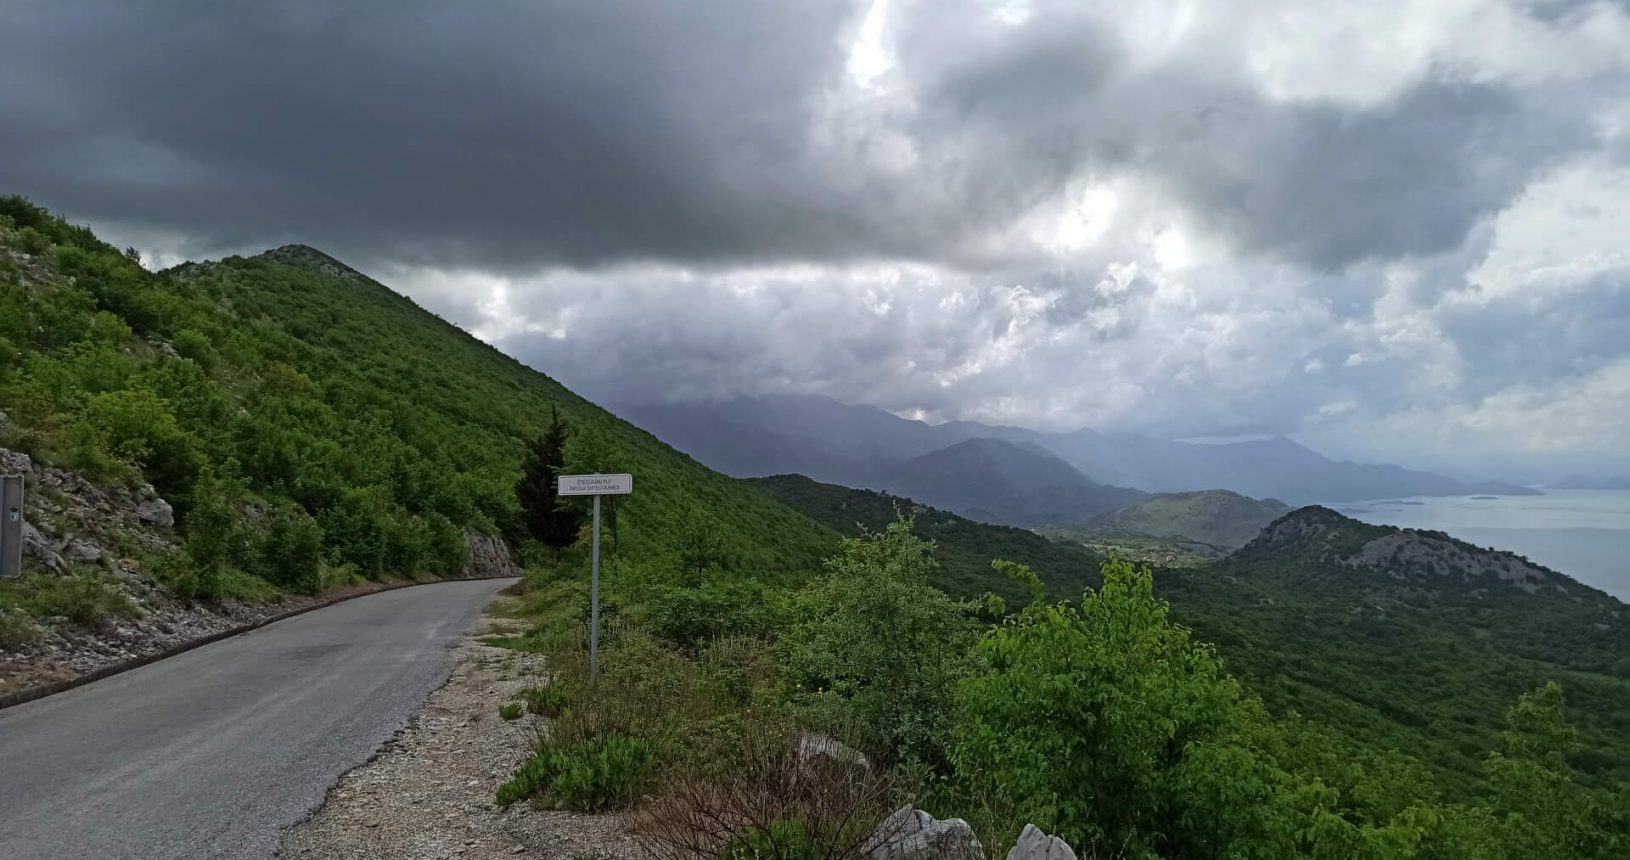 The road and nature. Viewpoint Shtegvashe